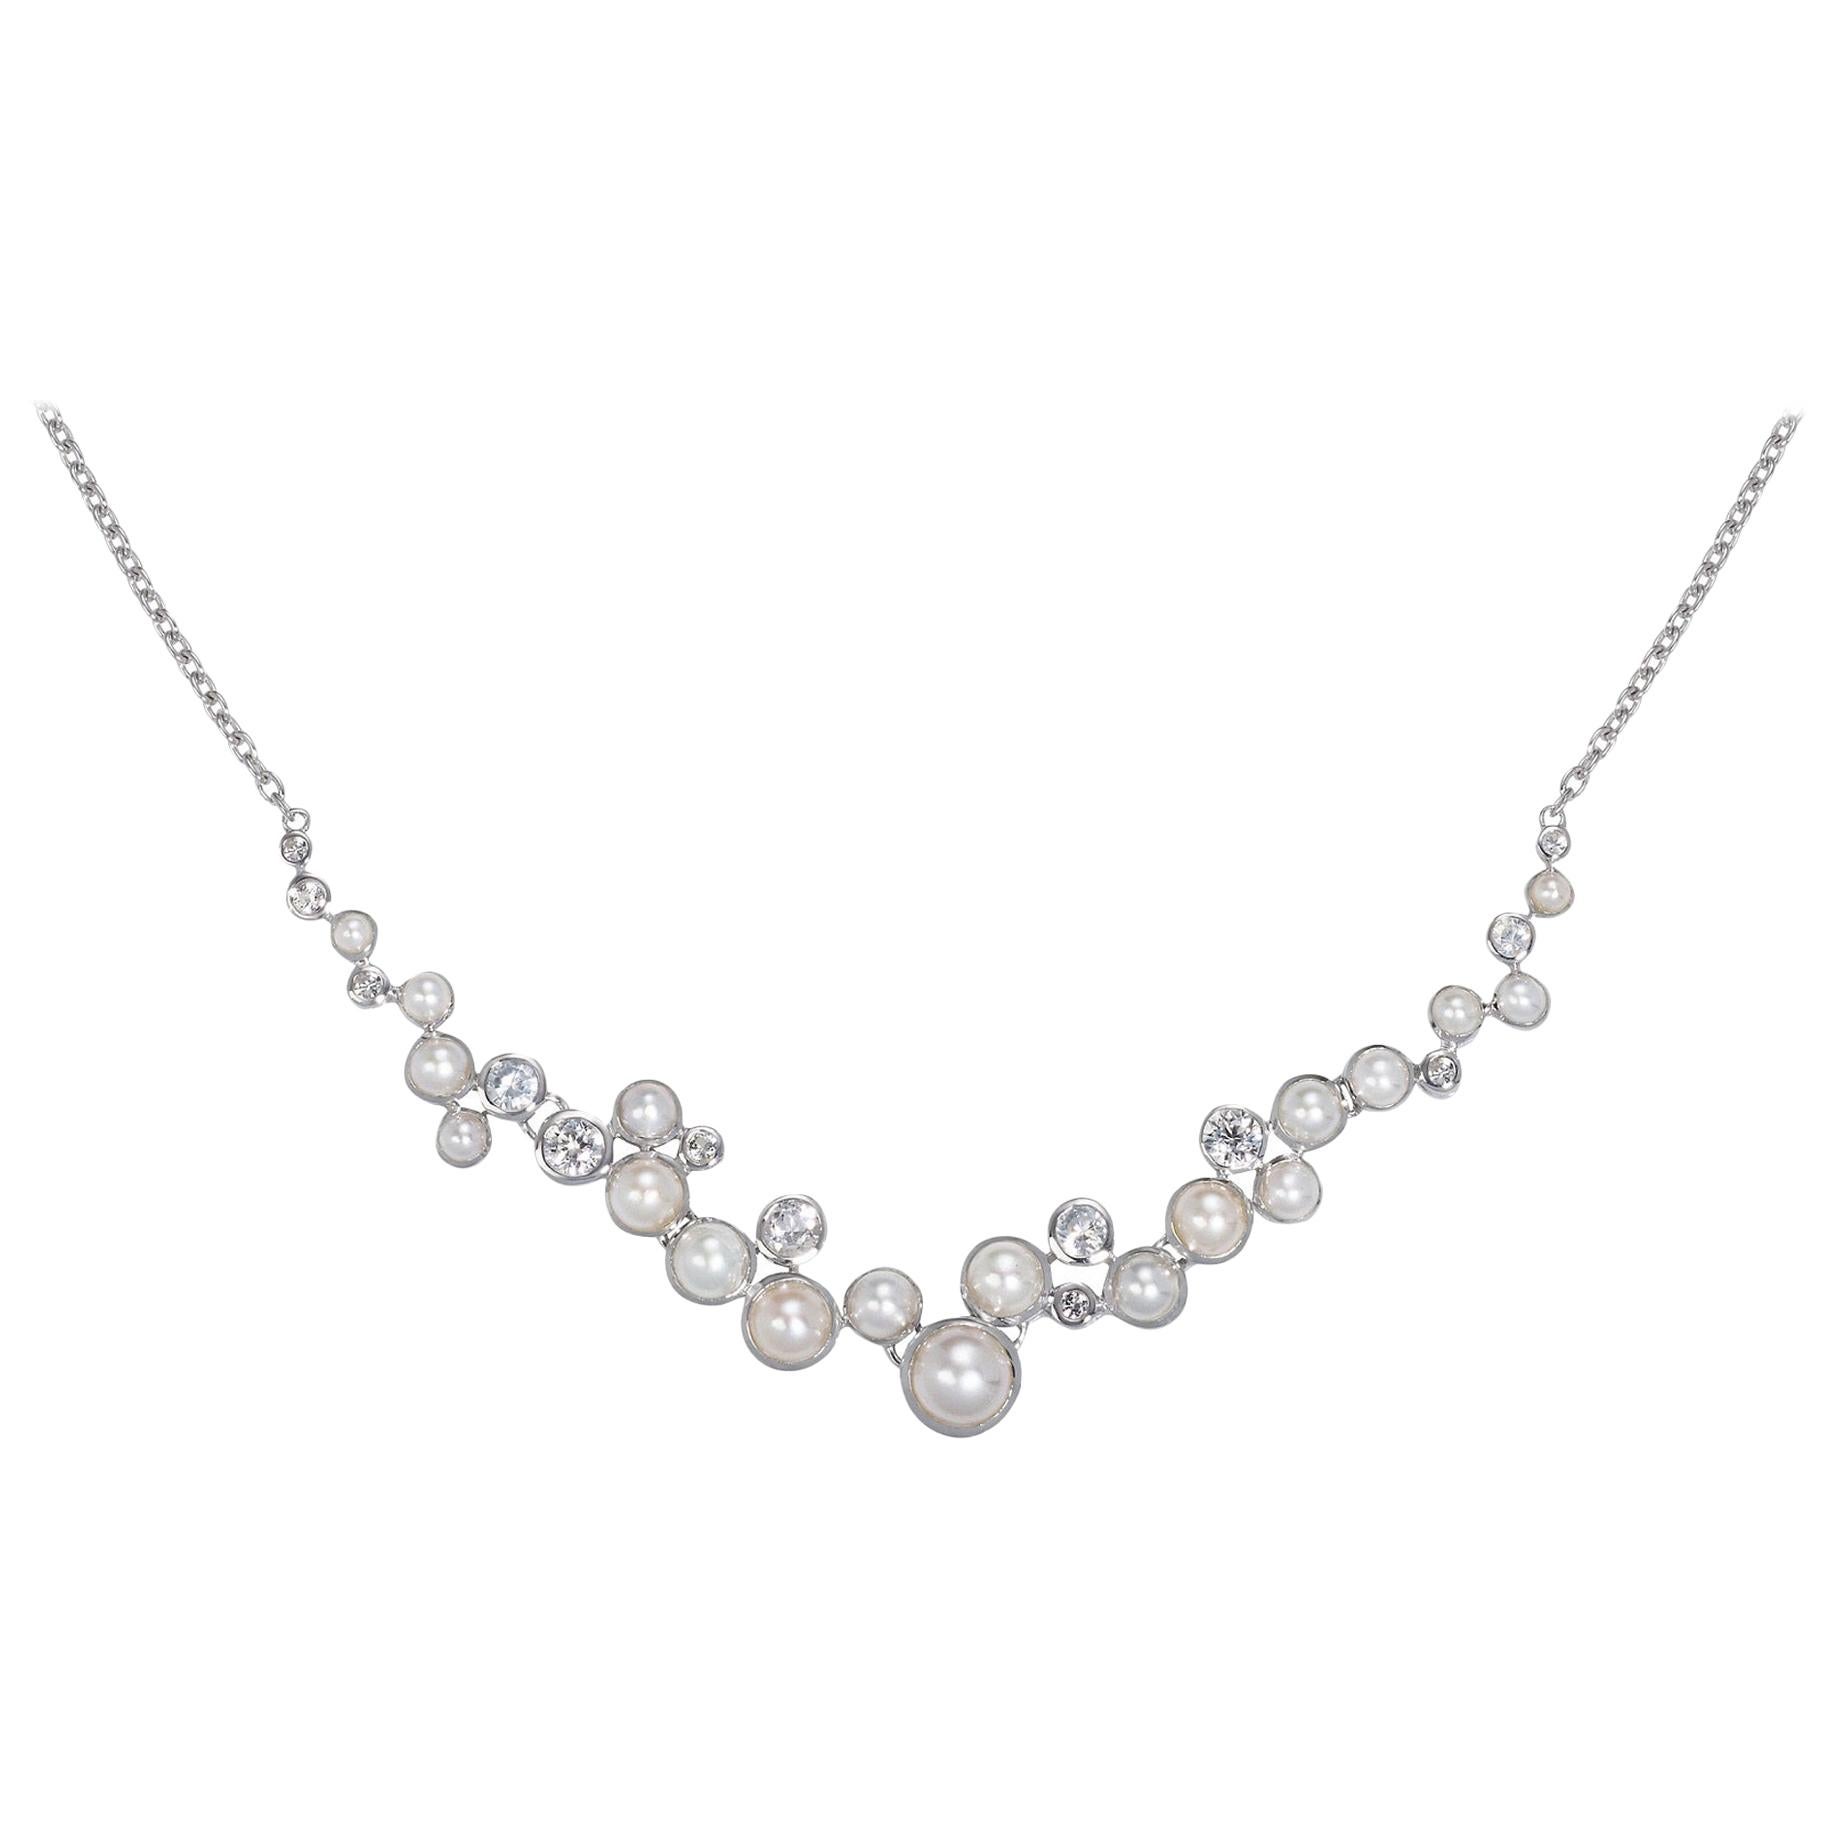 Freshwater Pearl and White Zircon Necklace